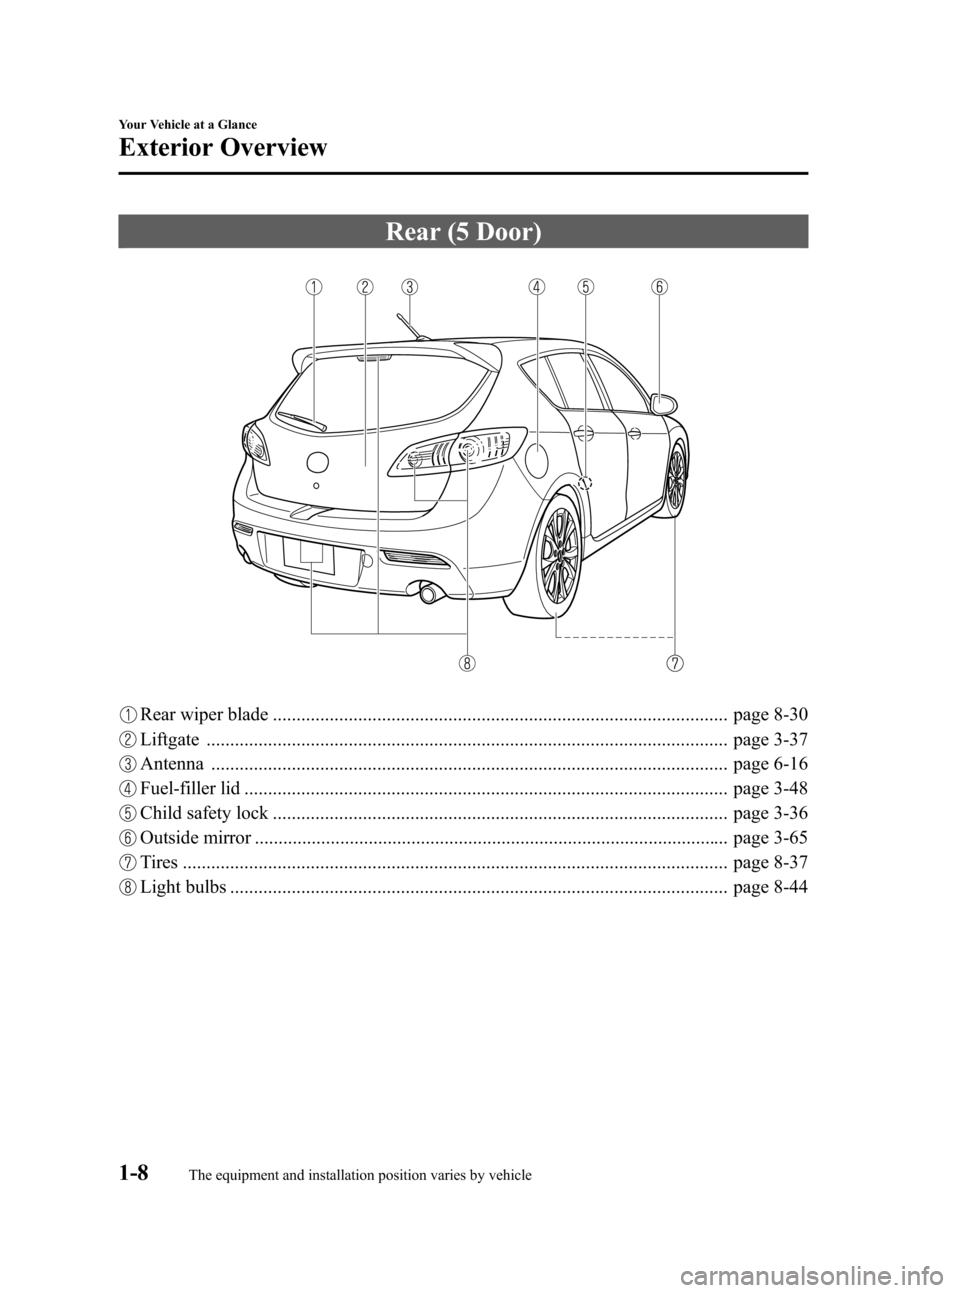 MAZDA MODEL 3 HATCHBACK 2012  Owners Manual (in English) Black plate (14,1)
Rear (5 Door)
Rear wiper blade ................................................................................................ page 8-30
Liftgate ..................................